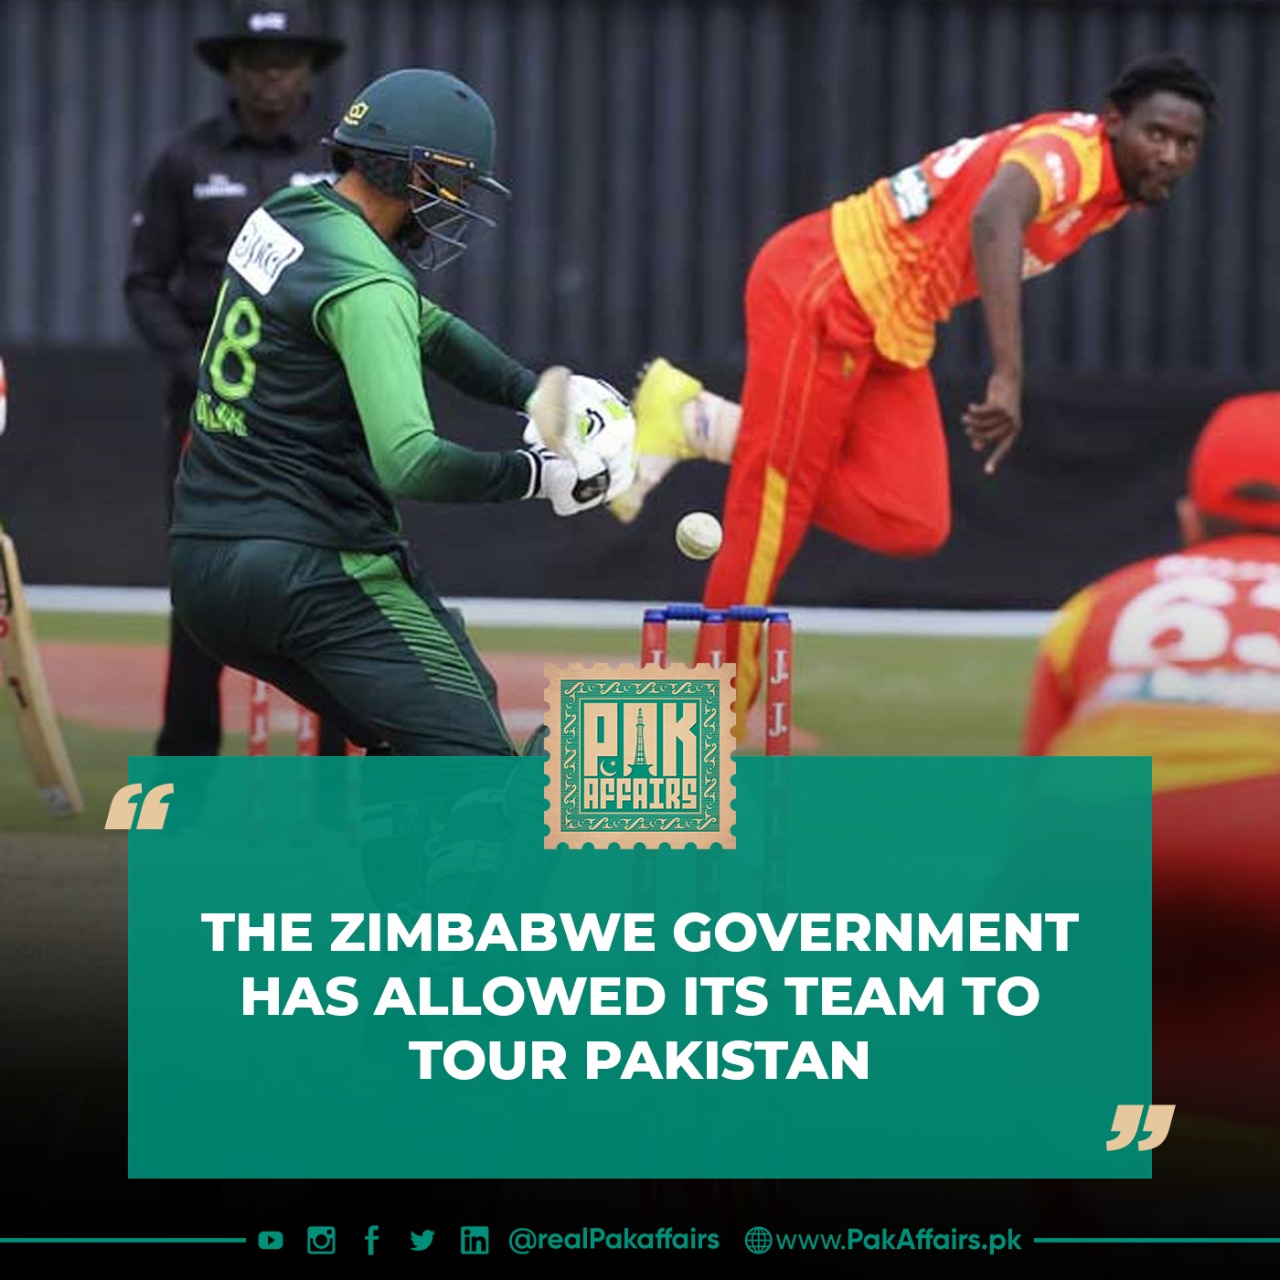 The Zimbabwe government has allowed its team to tour Pakistan